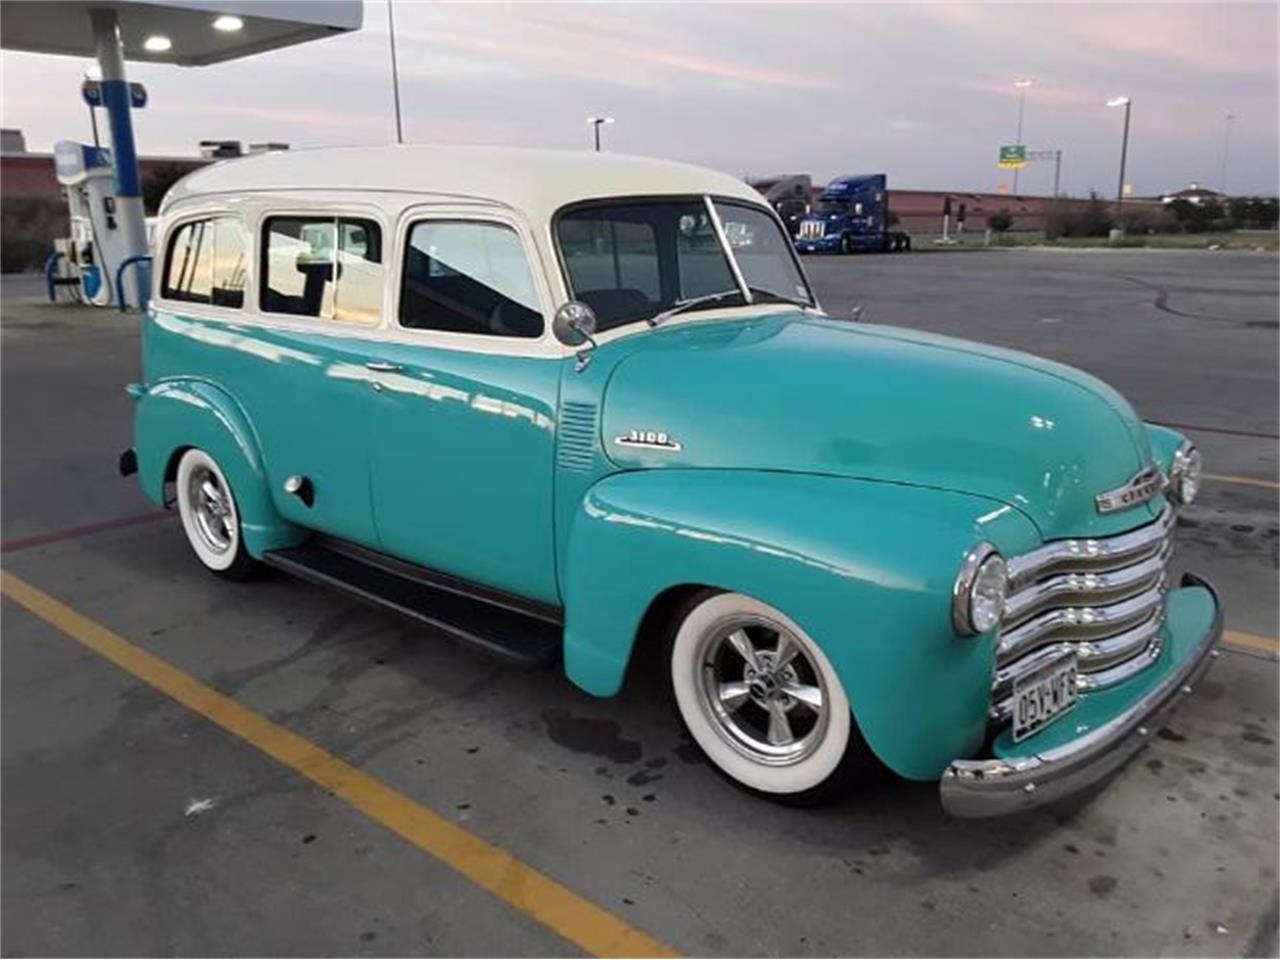 Classic 1948 Chevrolet Suburban For Sale. Price 49 000 USD - Dyler